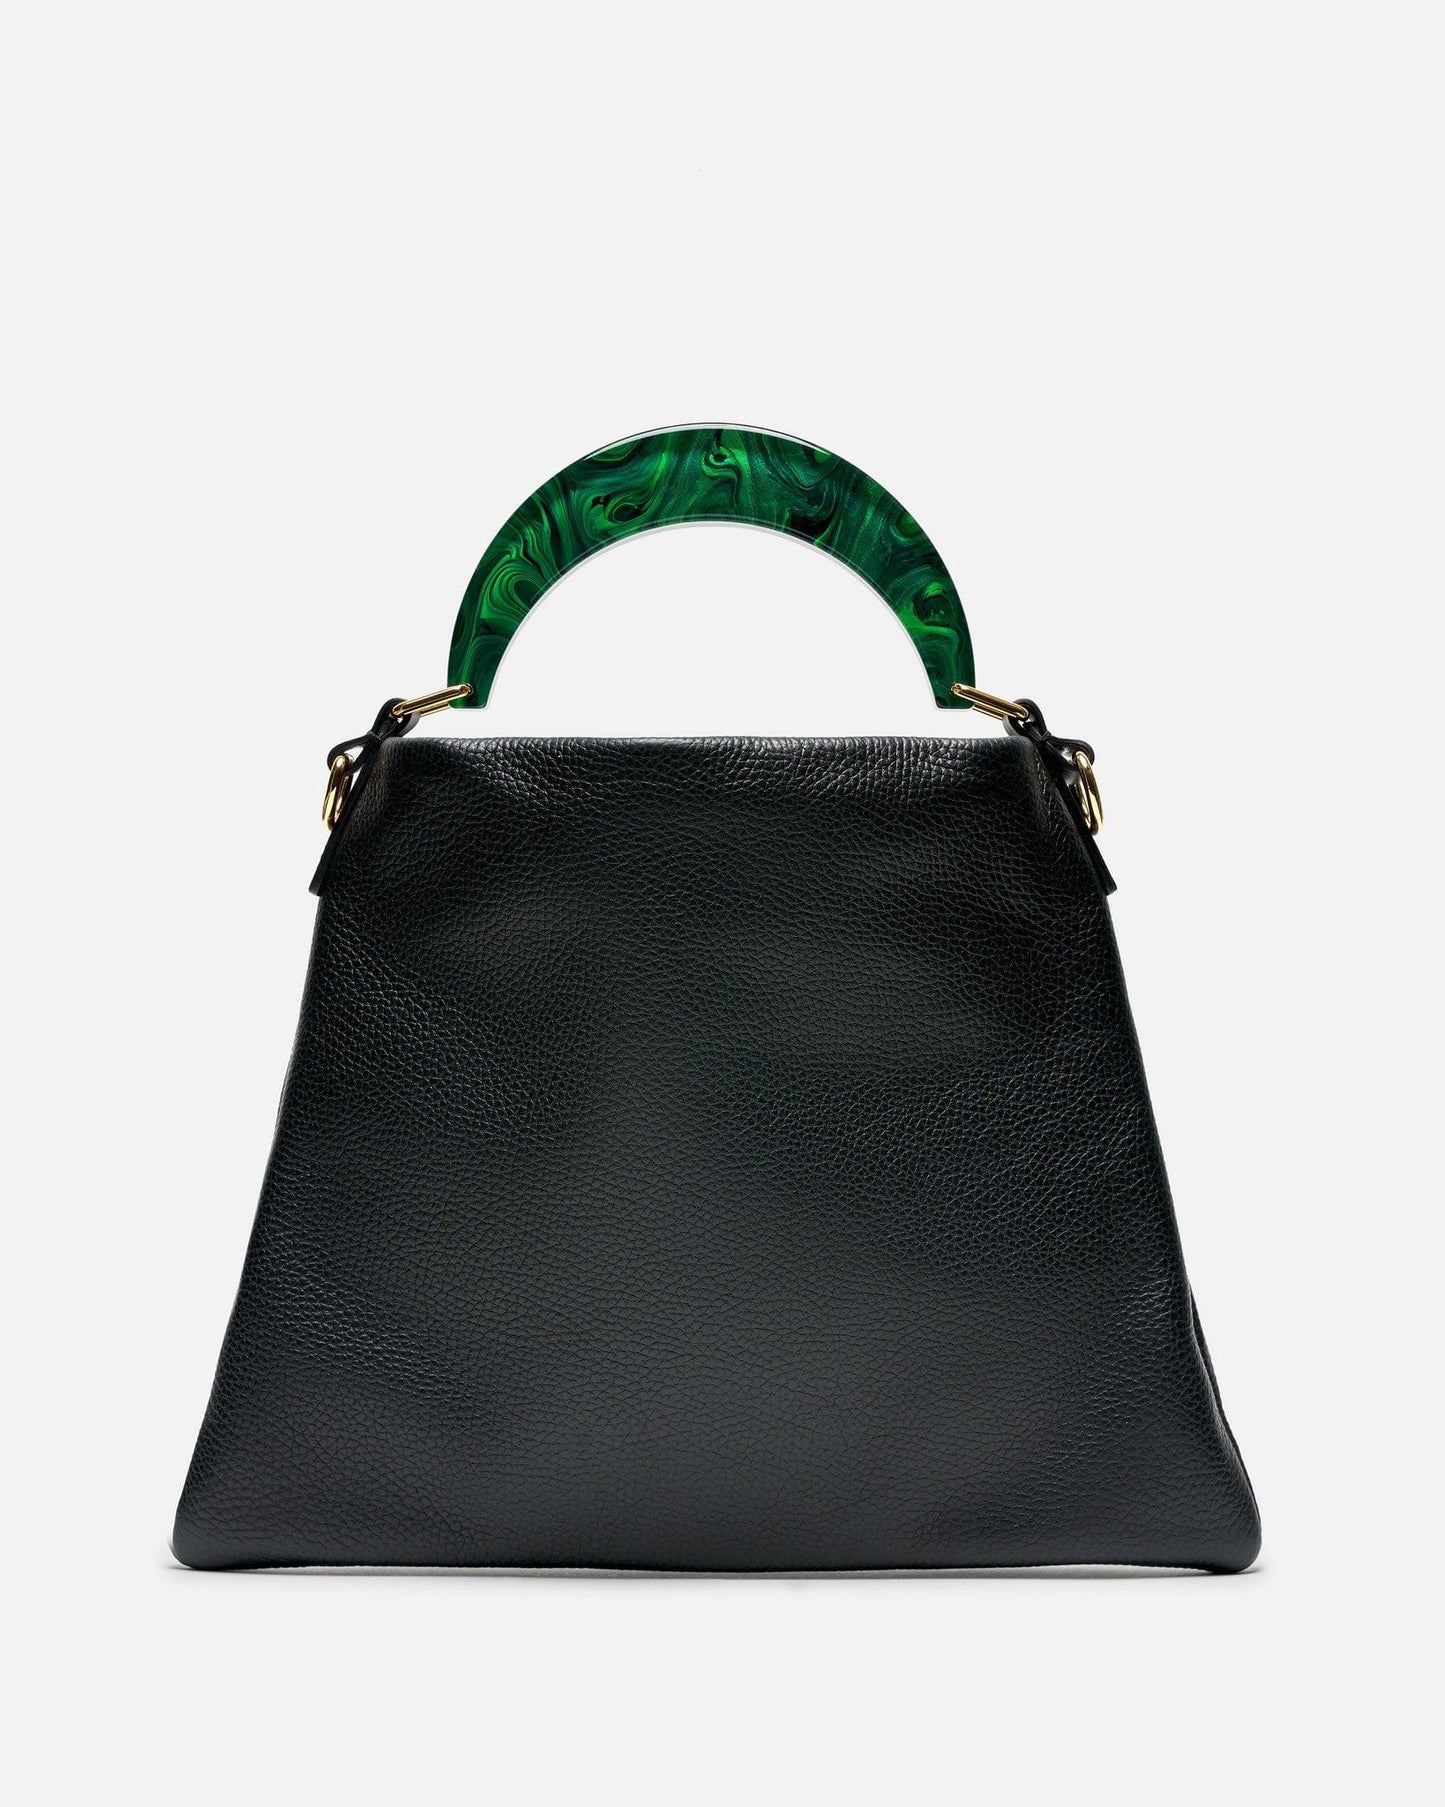 Marni Women Bags O/S Milled Calf Leather Venice Hobo Small in Black/Spherical Green